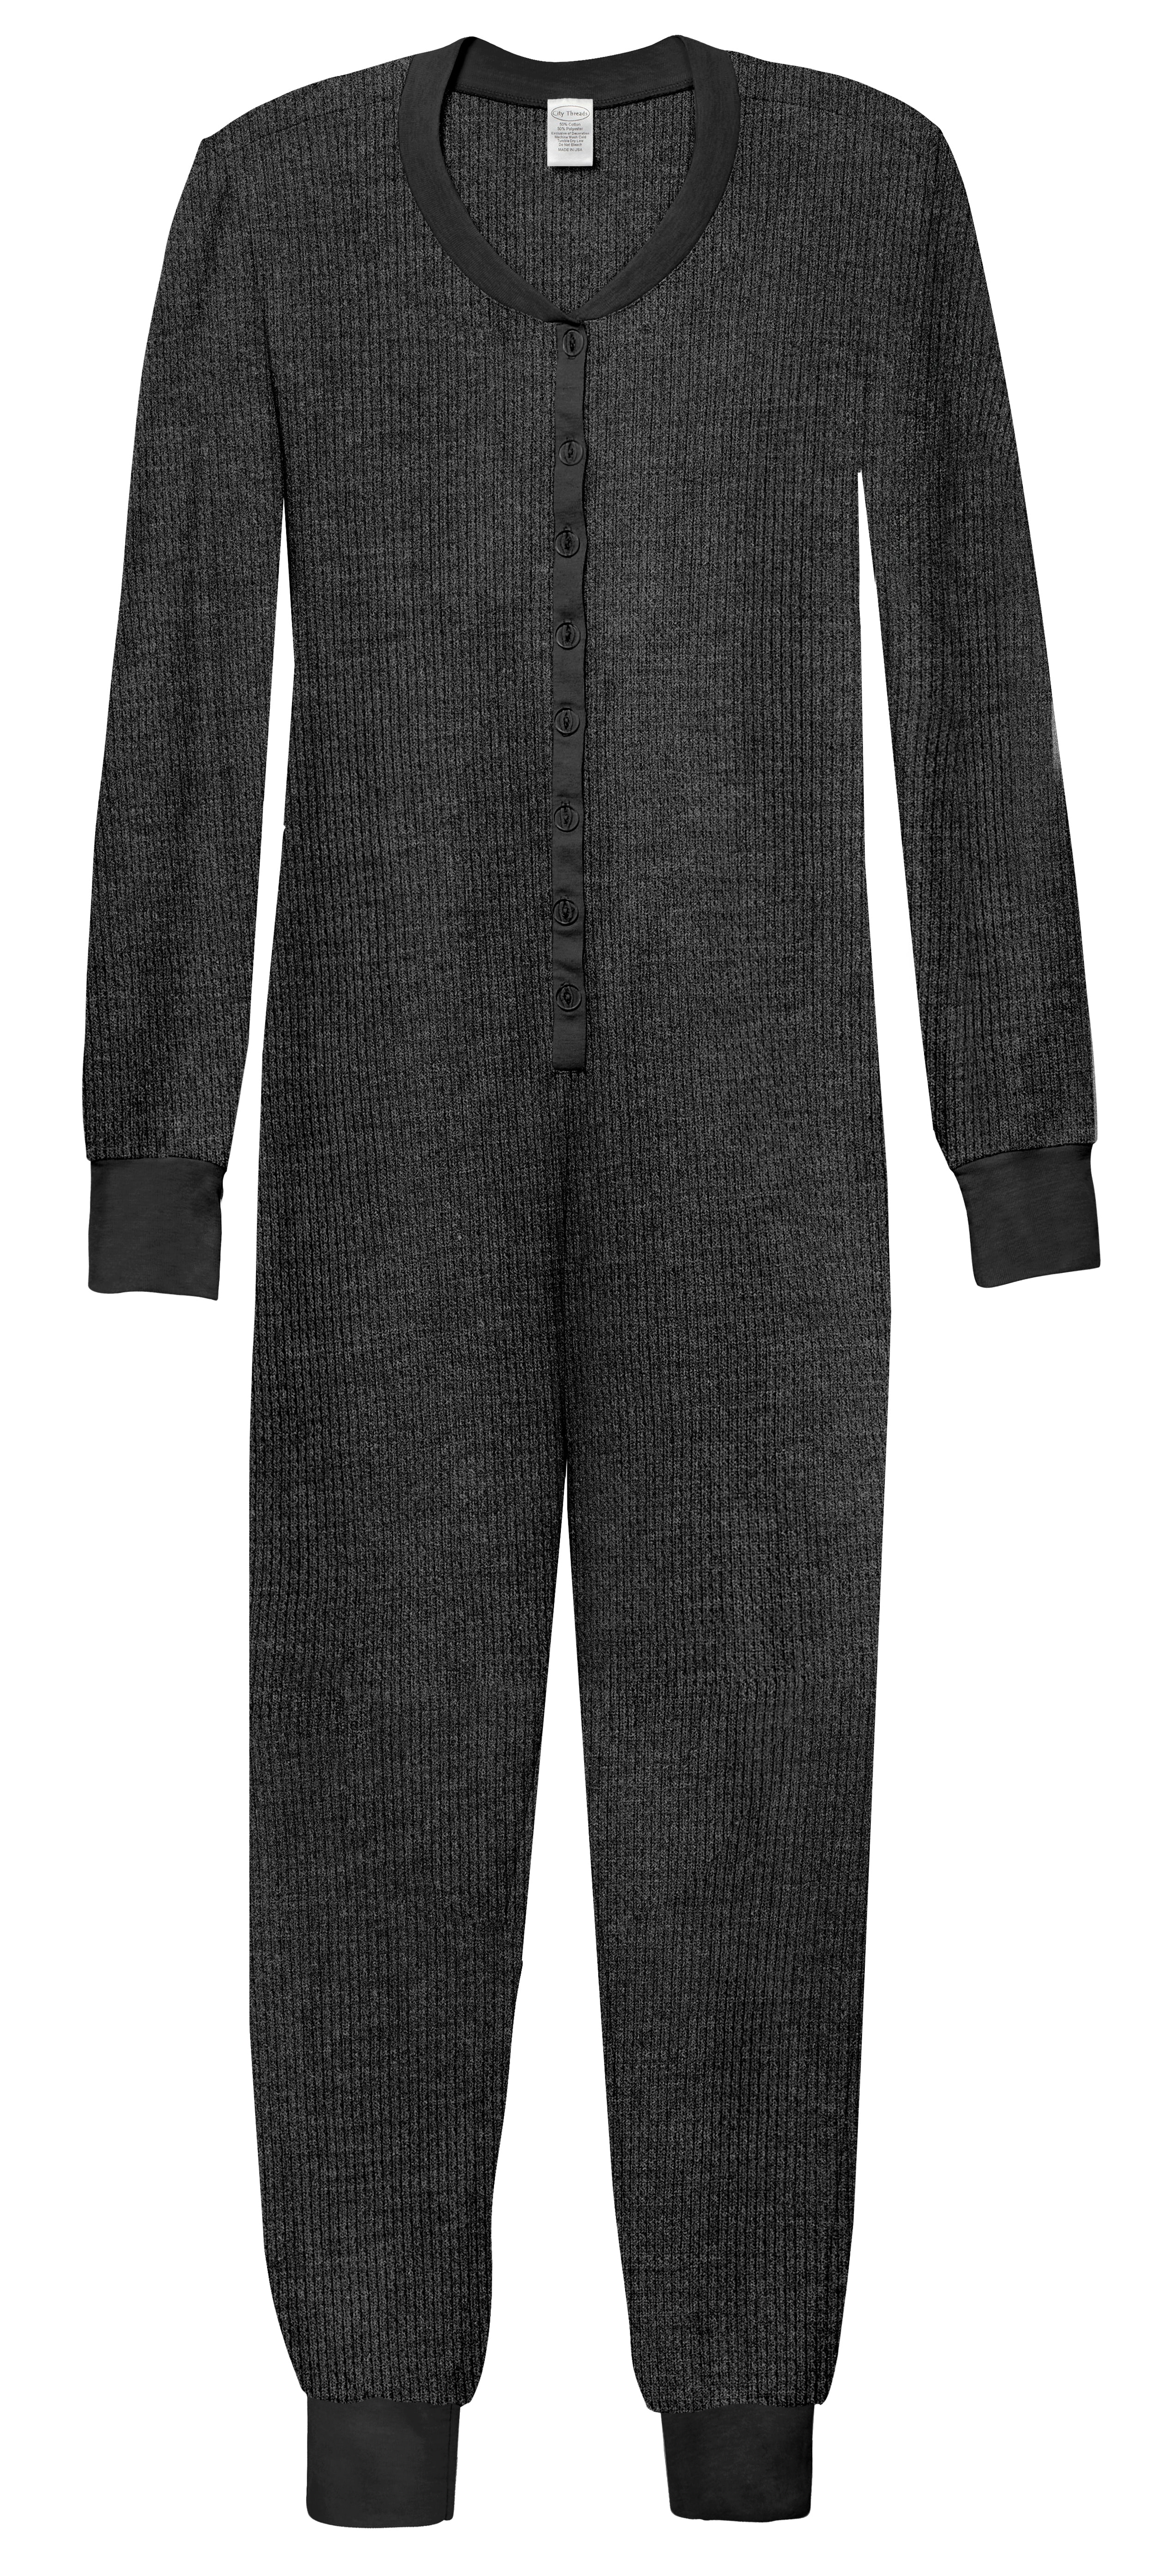 Women's Thermal Union Suit - City Threads USA